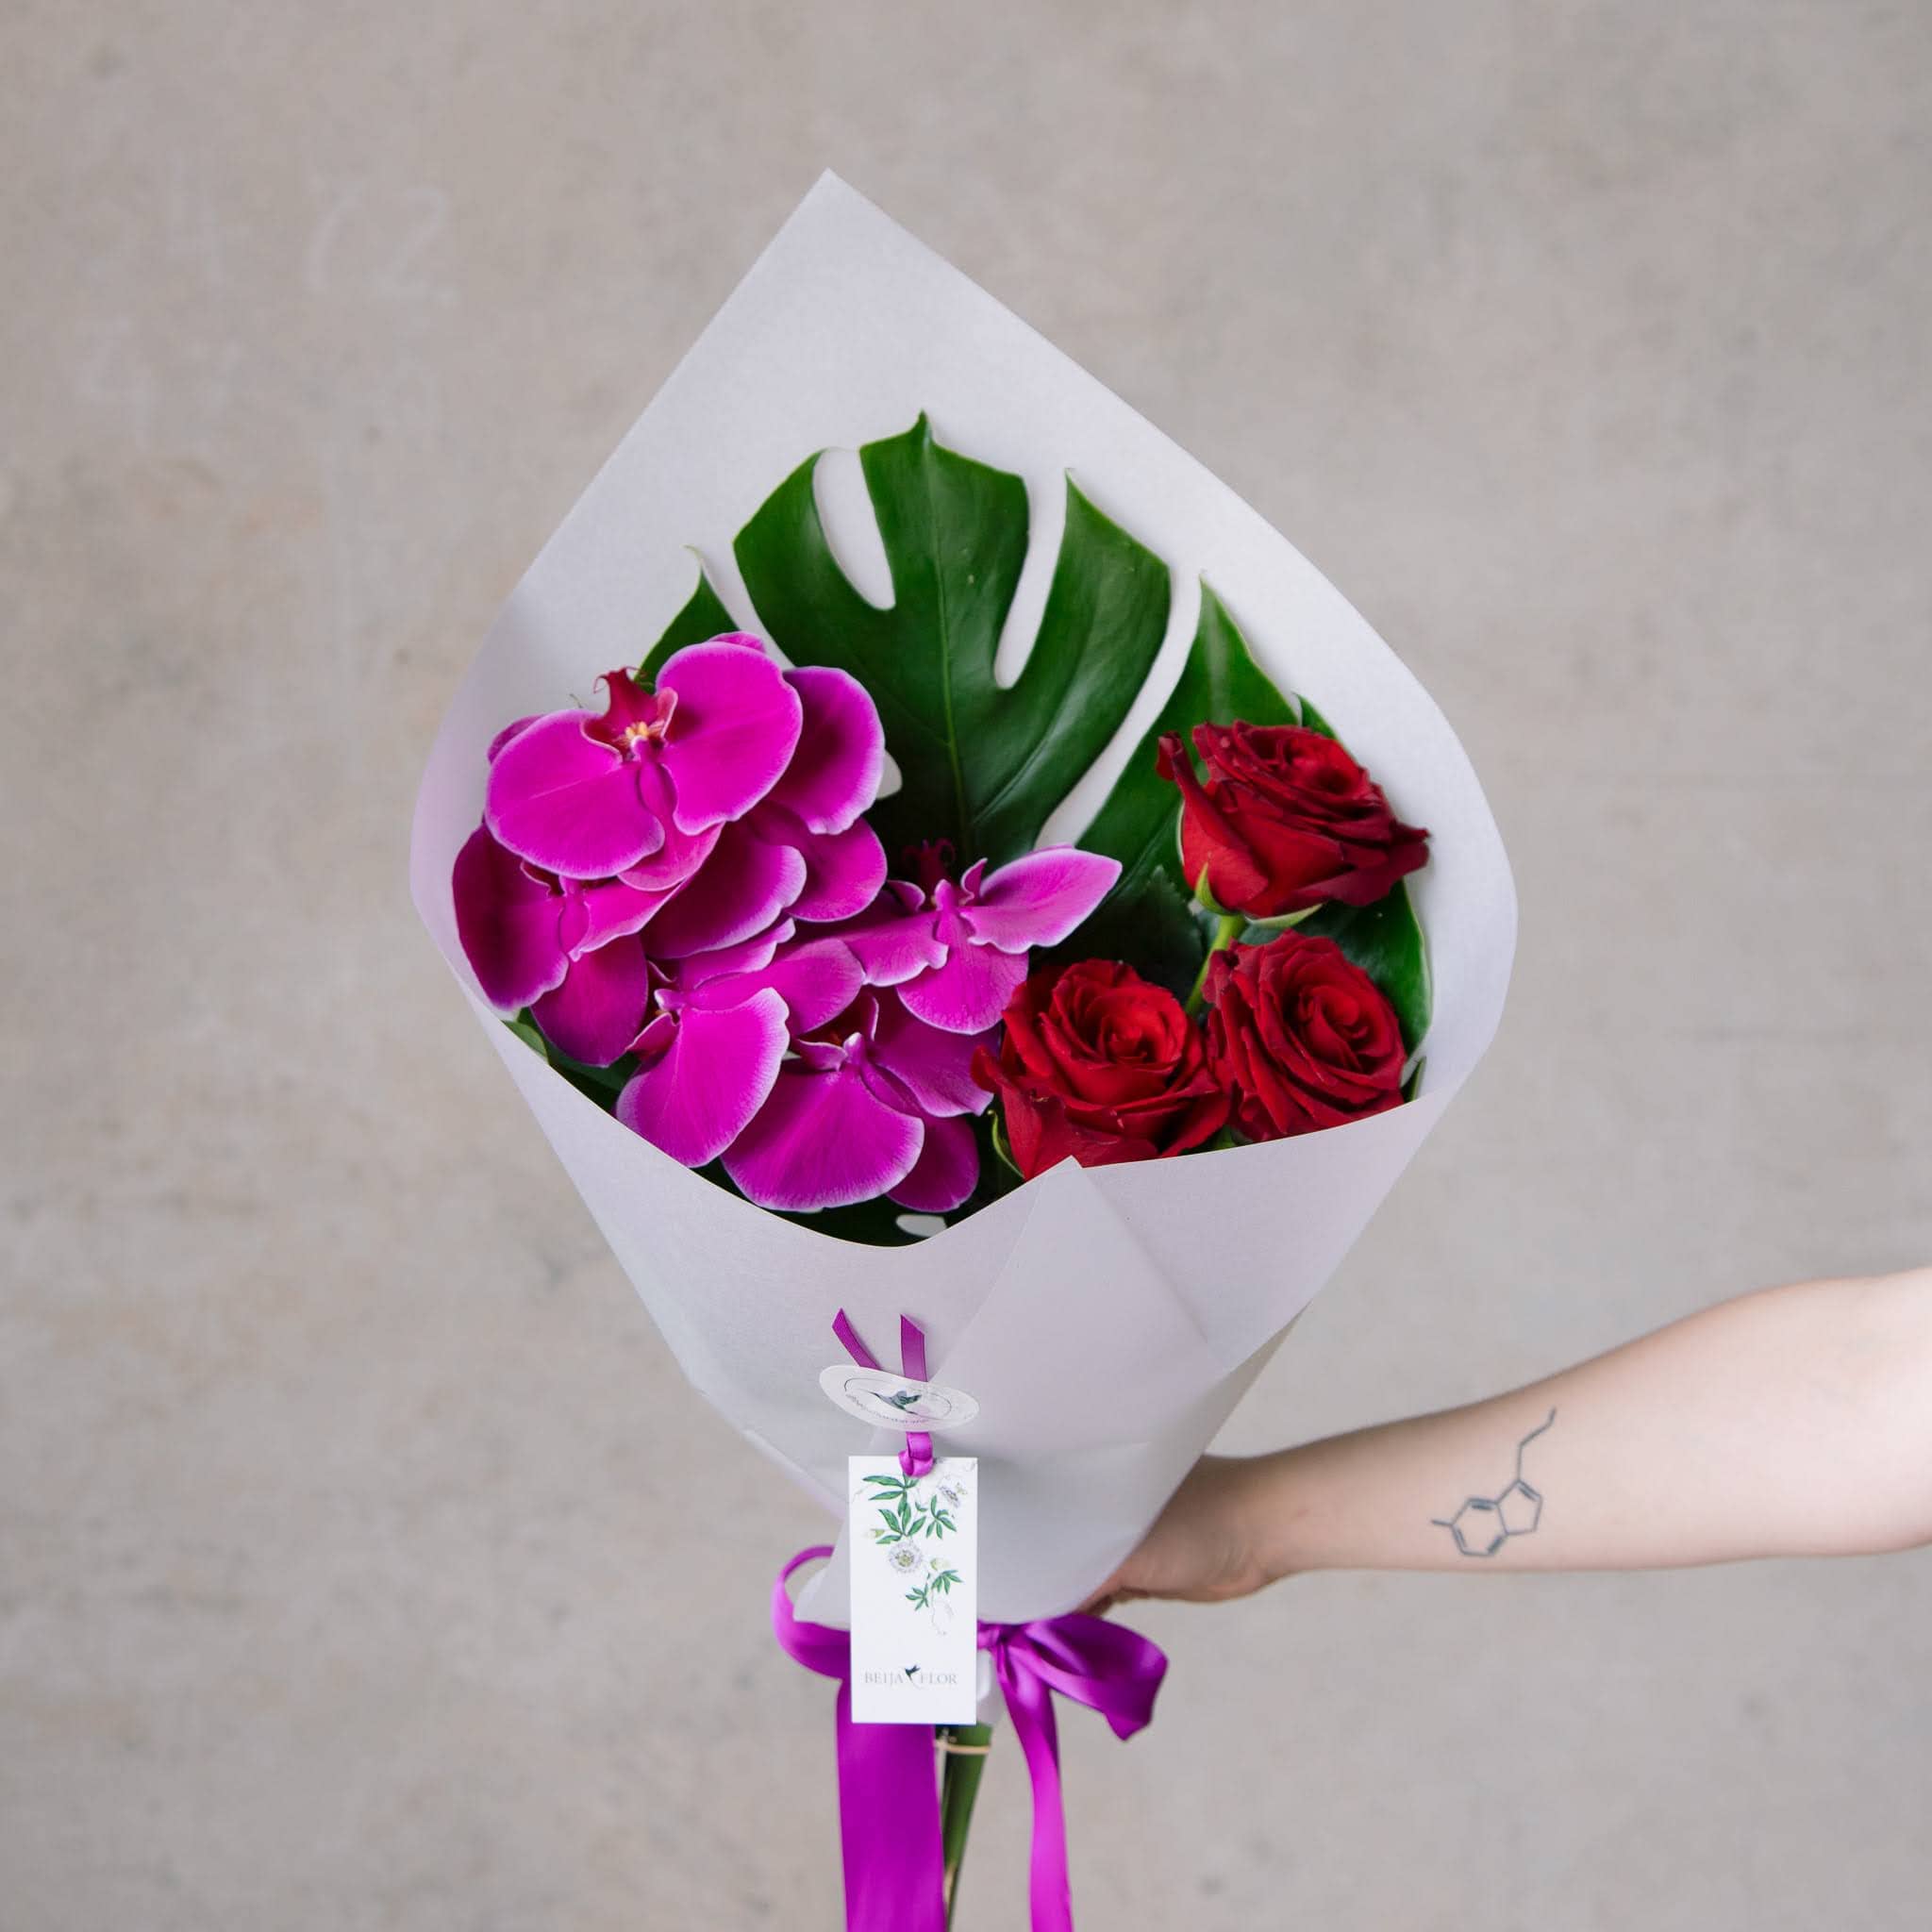 Valentines Day rose and phalenopsis orchid bouquet in white paper and ribbon. 